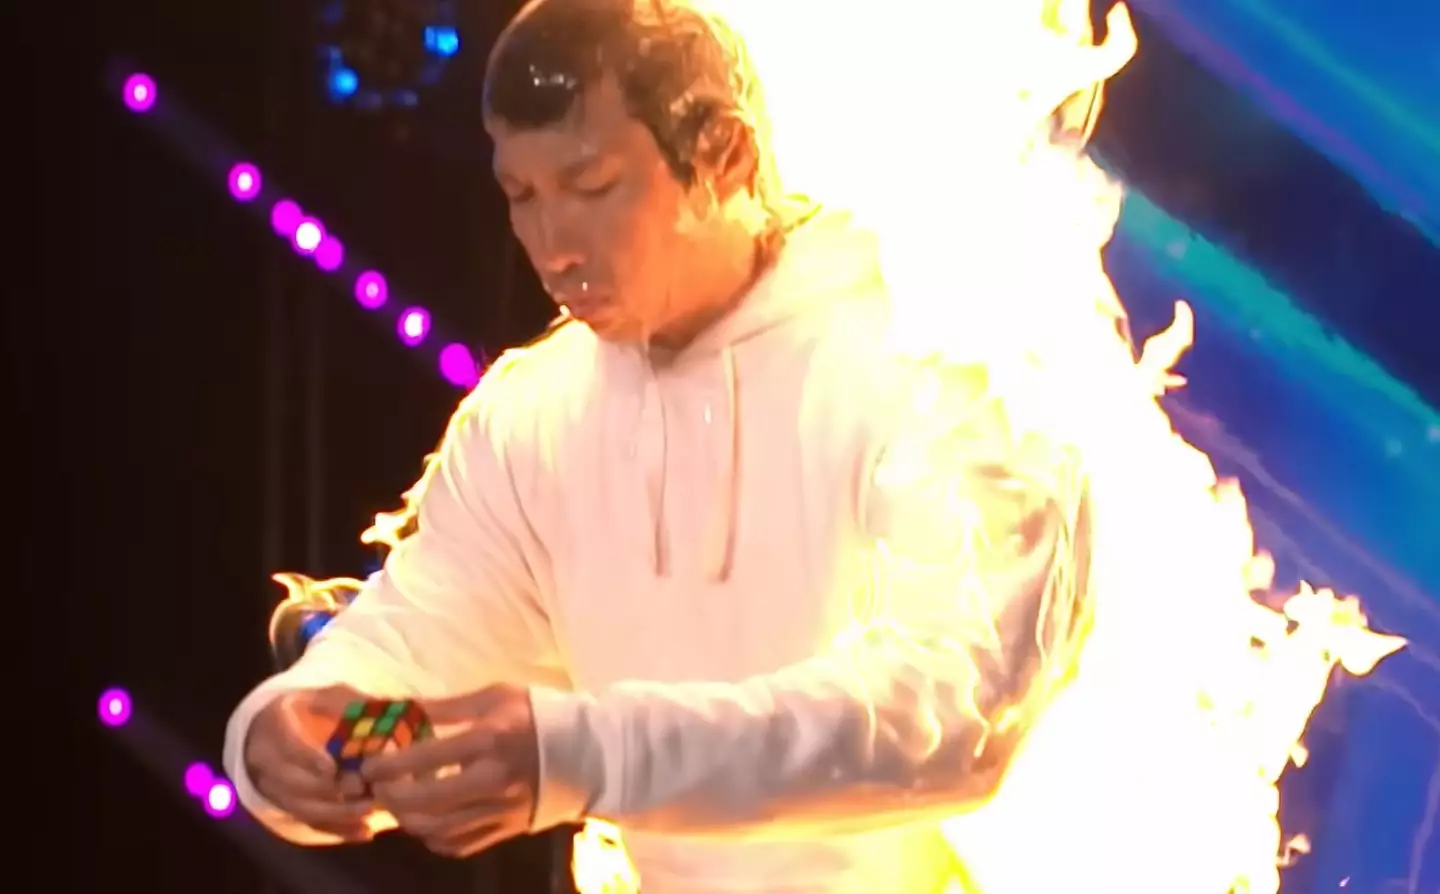 Viewers were shocked to see a man being lit on fire as he tried to solve the puzzle and many thought once was quite enough.